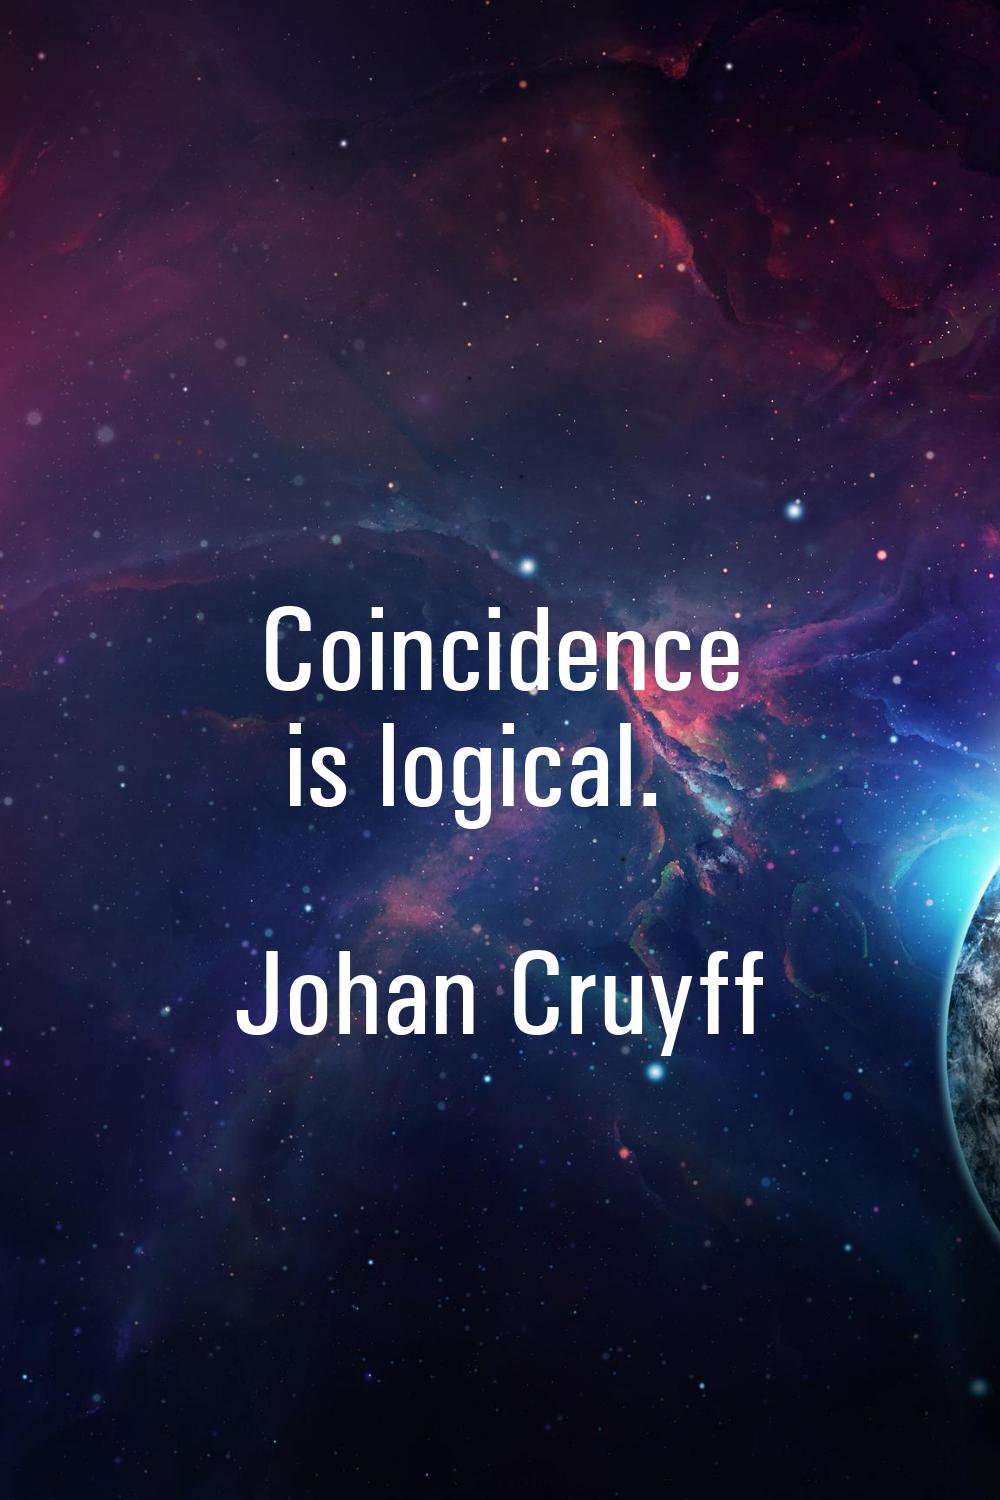 Coincidence is logical.